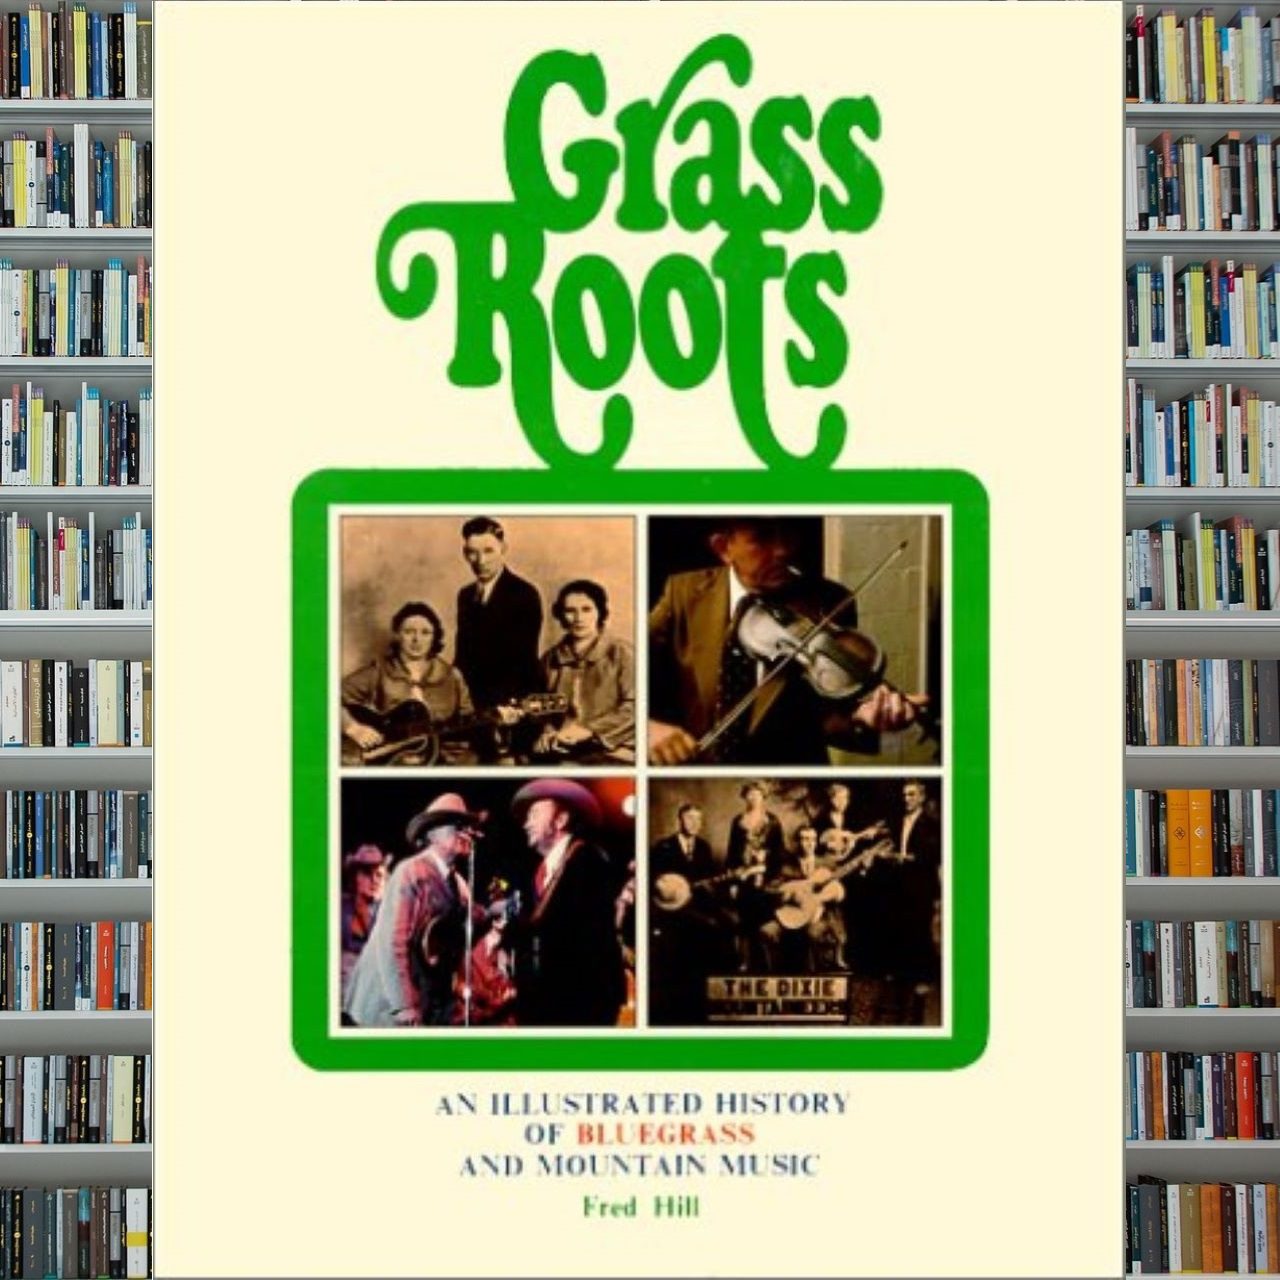 Grass Roots. An Illustrated History Of Bluegrass And Mountain Music